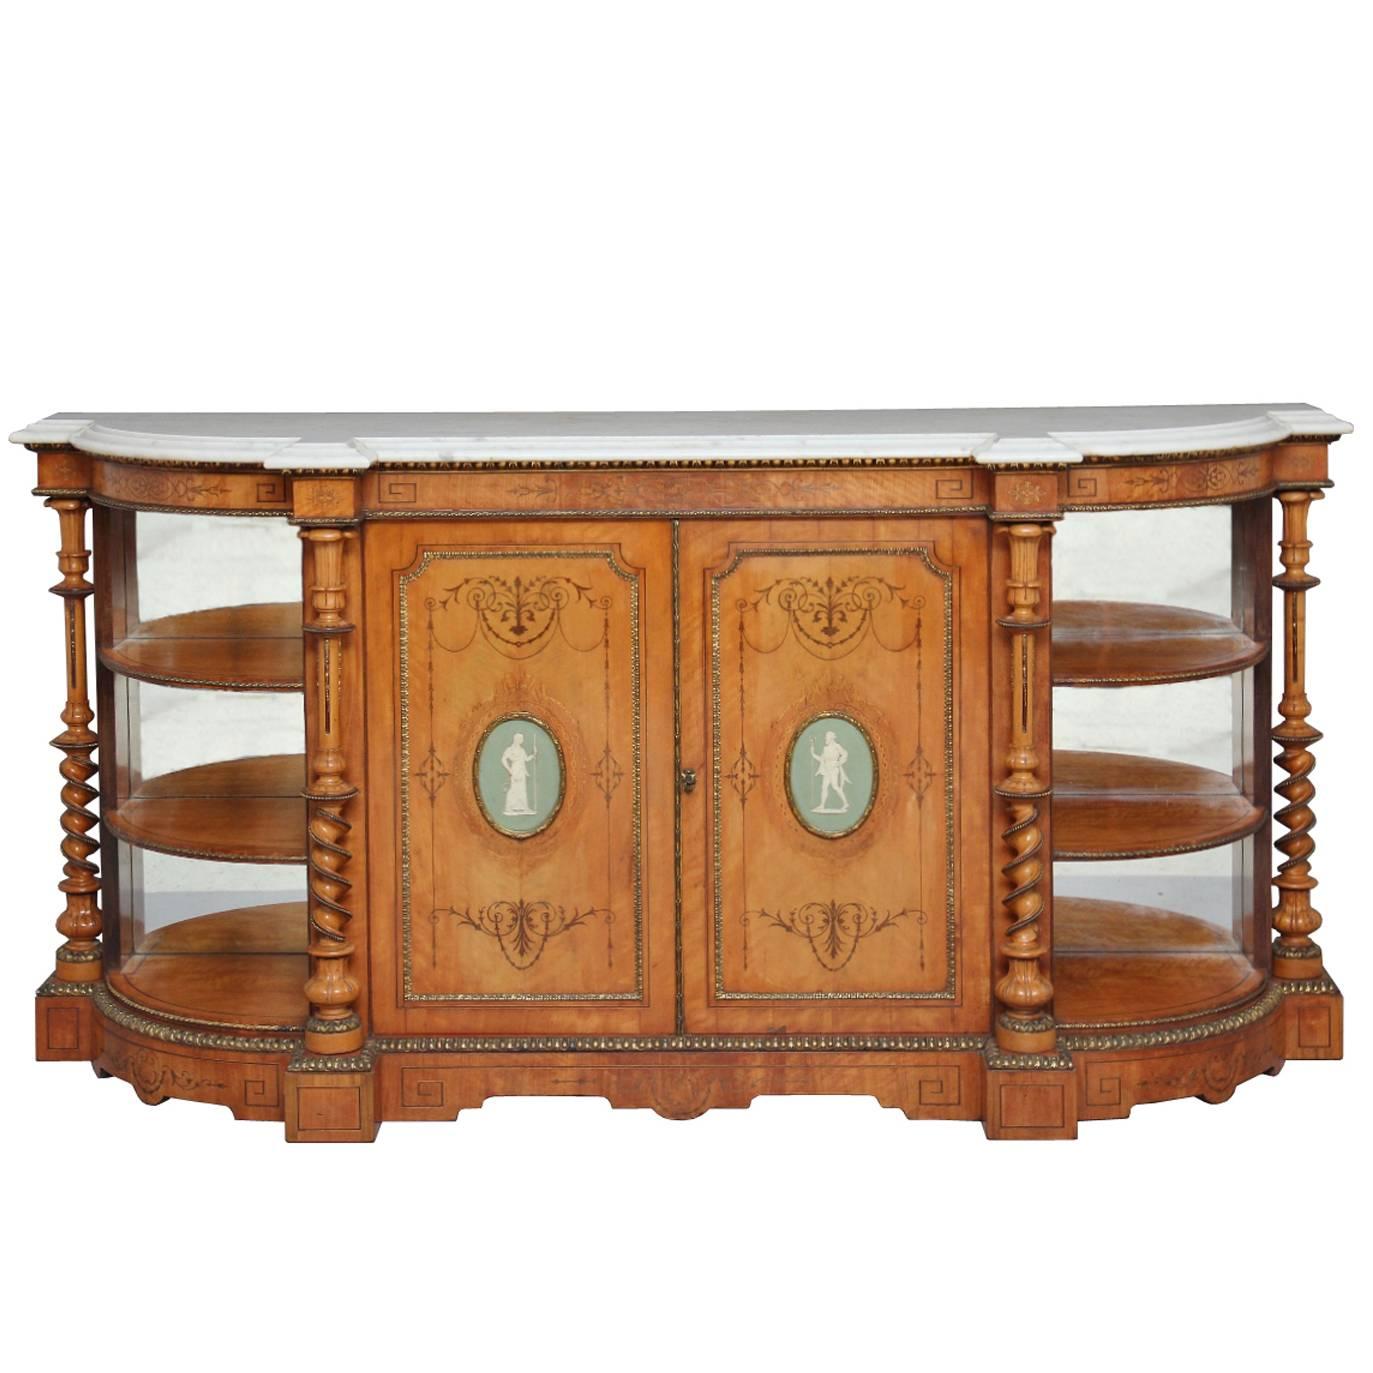 Exhibition Quality 19th Century Satinwood Marble-Top Credenza